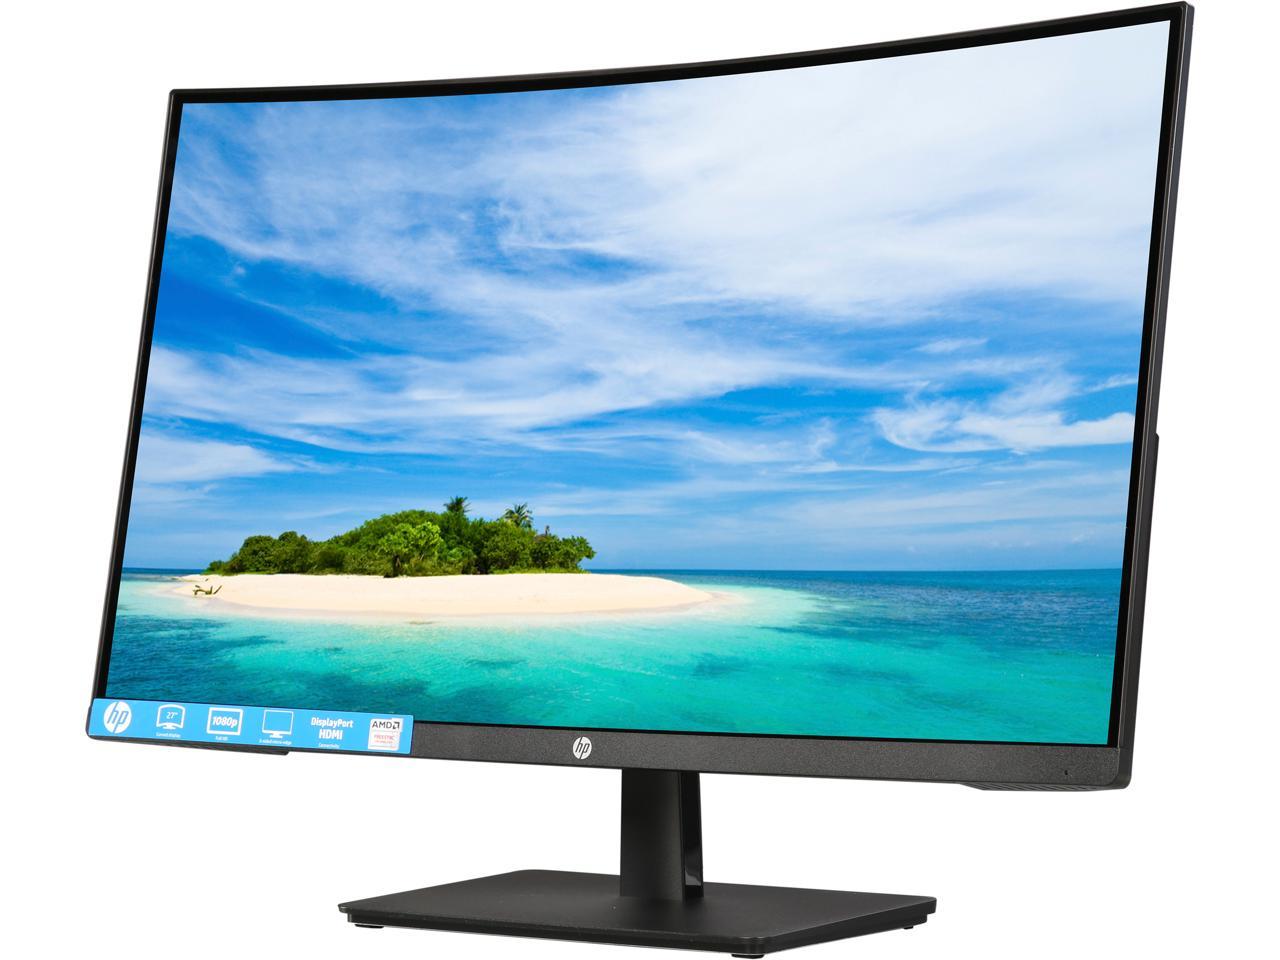 HP 27b 27" LED Monitor 16:9 5ms Full HD 1920 x 1080 16.7 Million Colors 300 cd/m2 DCR 10,000,000:1 HDMI, DisplayPort WEEE, cTUVus, China Energy Label (CEL), EP